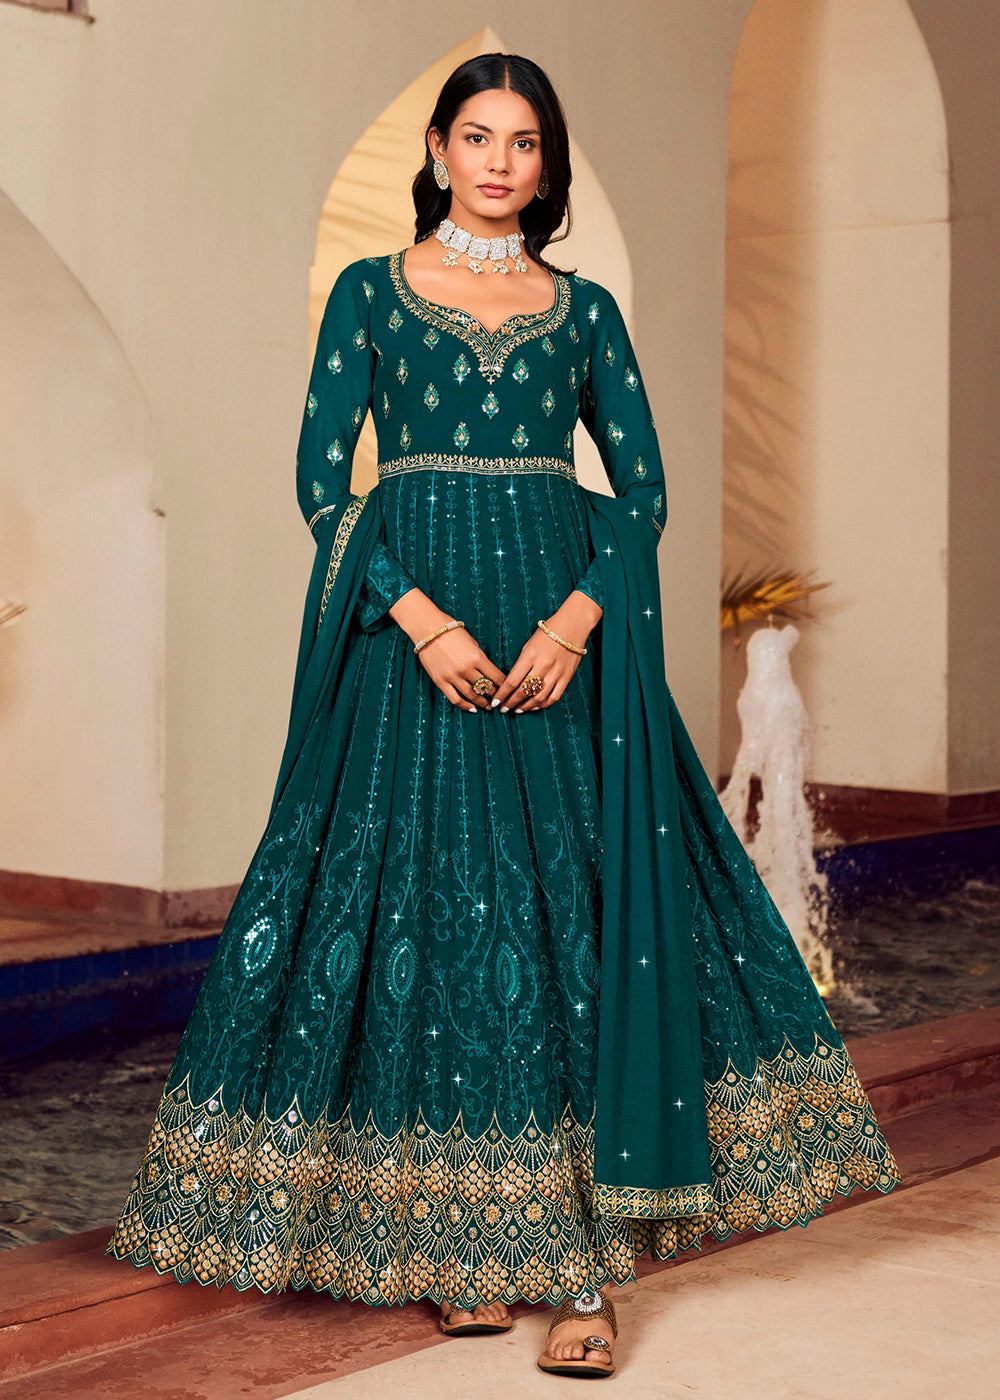 Buy Now Floor Length Classic Teal Wedding Wear Anarkali Suit Online in USA, UK, Australia, New Zealand, Canada, Italy & Worldwide at Empress Clothing.